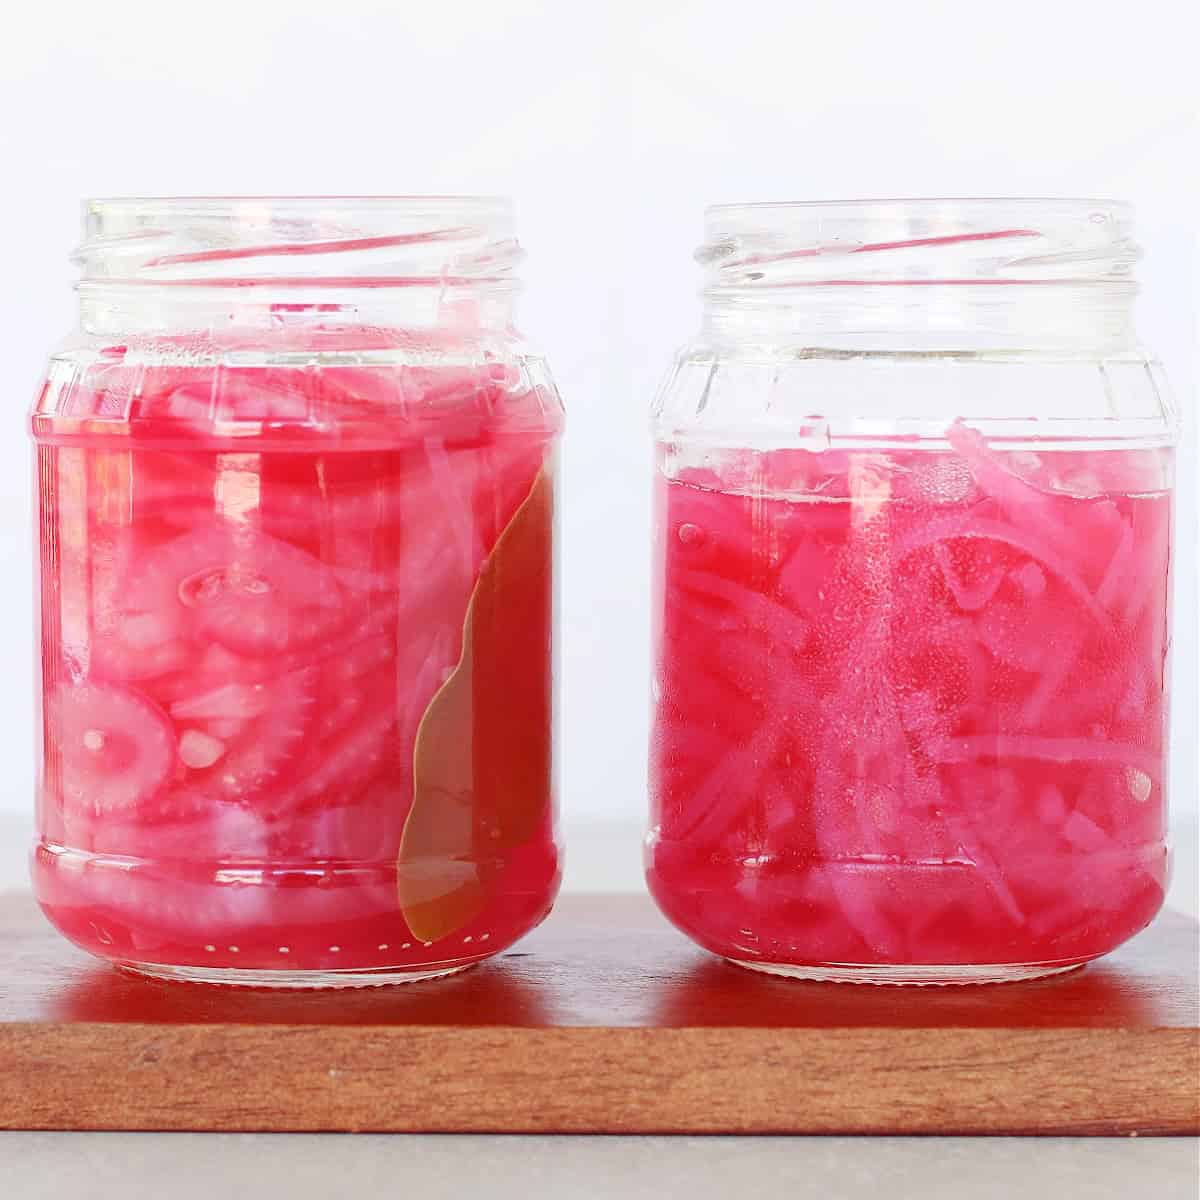 Two jars with pickled red onions on a cutting board.